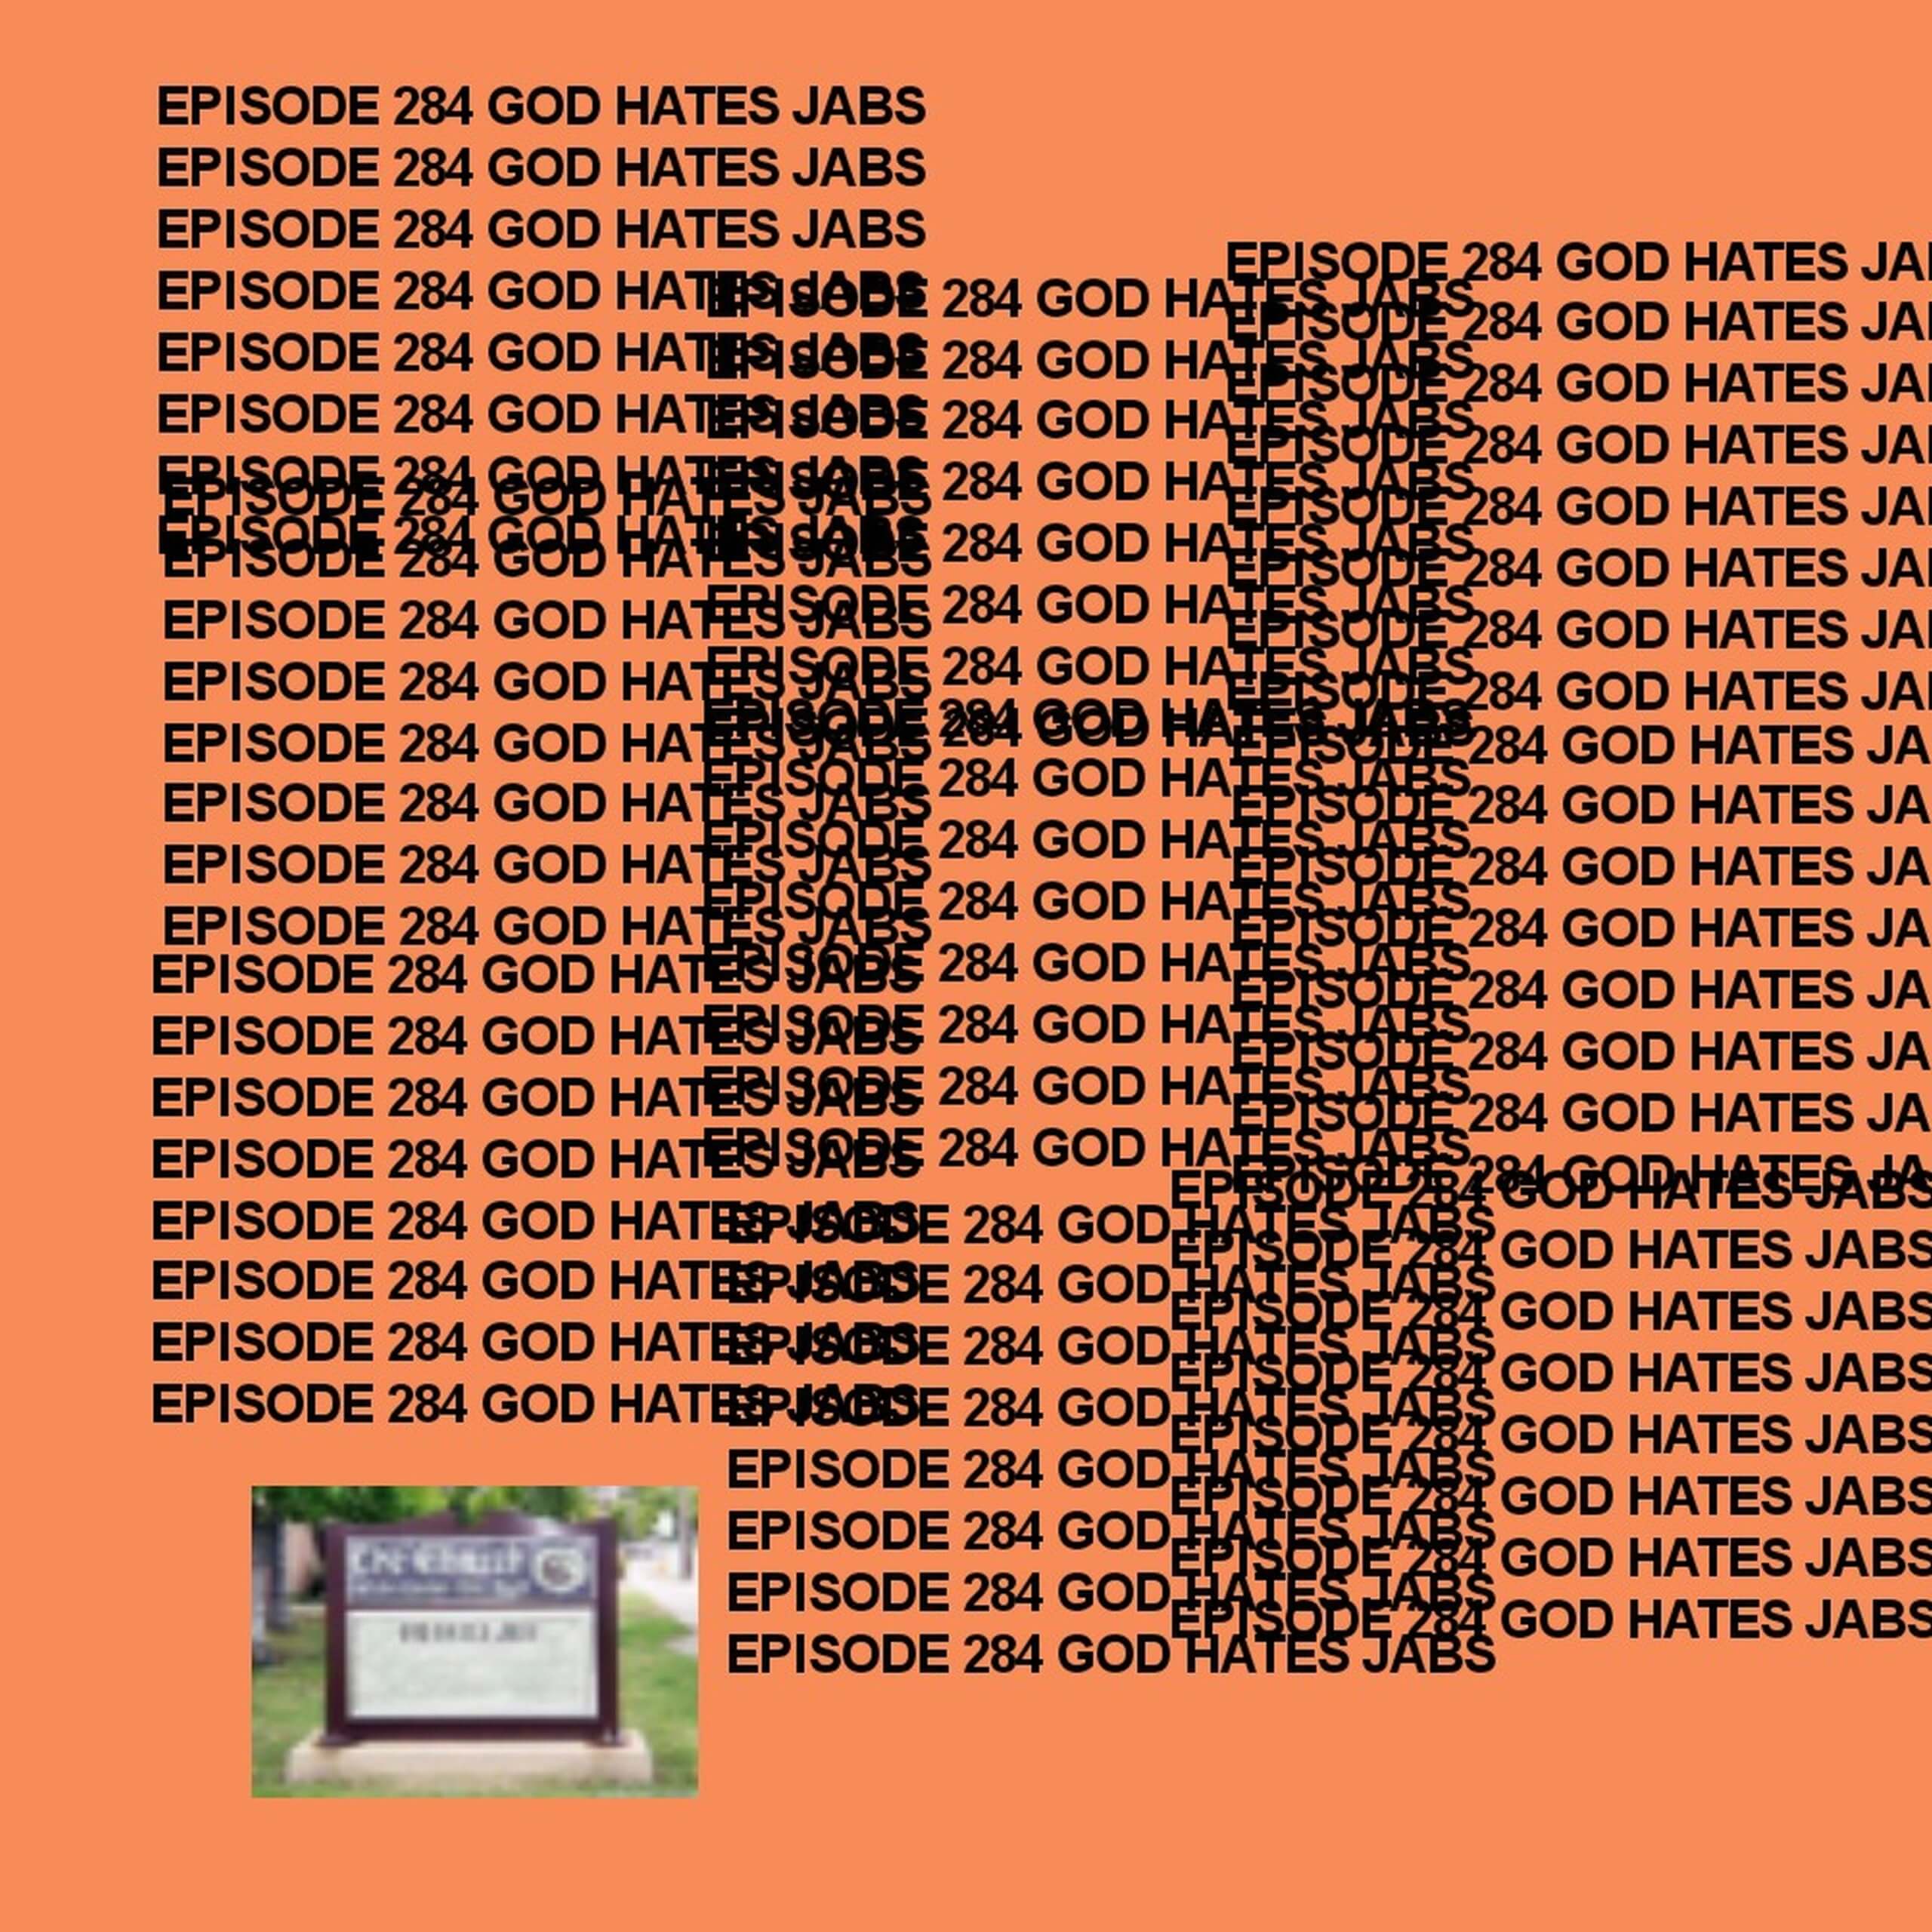 Tripod Broadcasting: Give That Some Thought Episode 284: God Hates Jabs